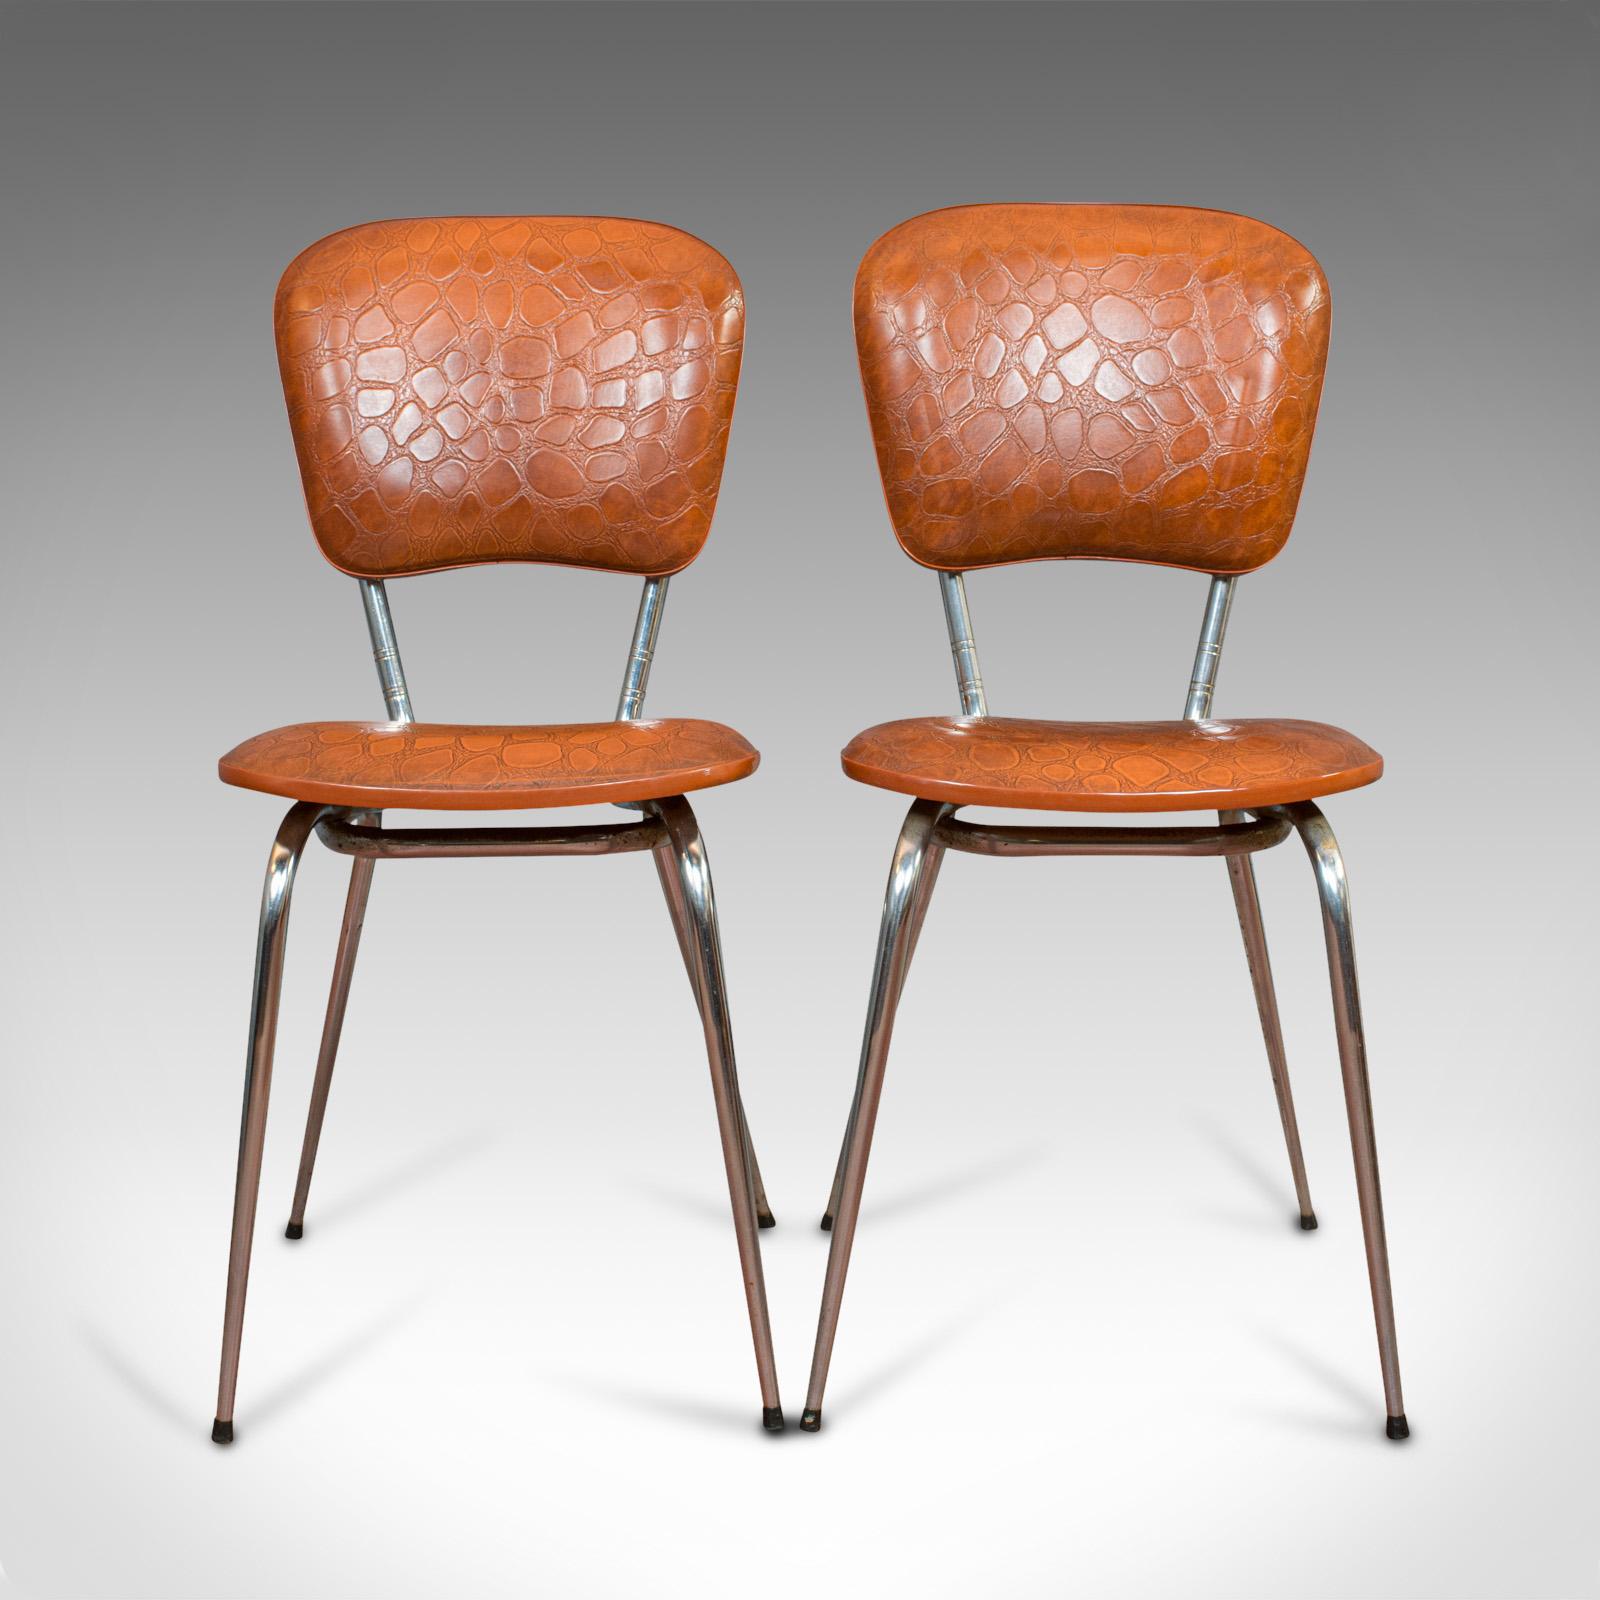 This is a pair of vintage chairs. A French, faux crocodile upholstered desk or breakfast chair, dating to the mid-20th century, circa 1960.

Rich tan hues and appealing modern form
Displays a desirable aged patina
Comfortable, well padded seat